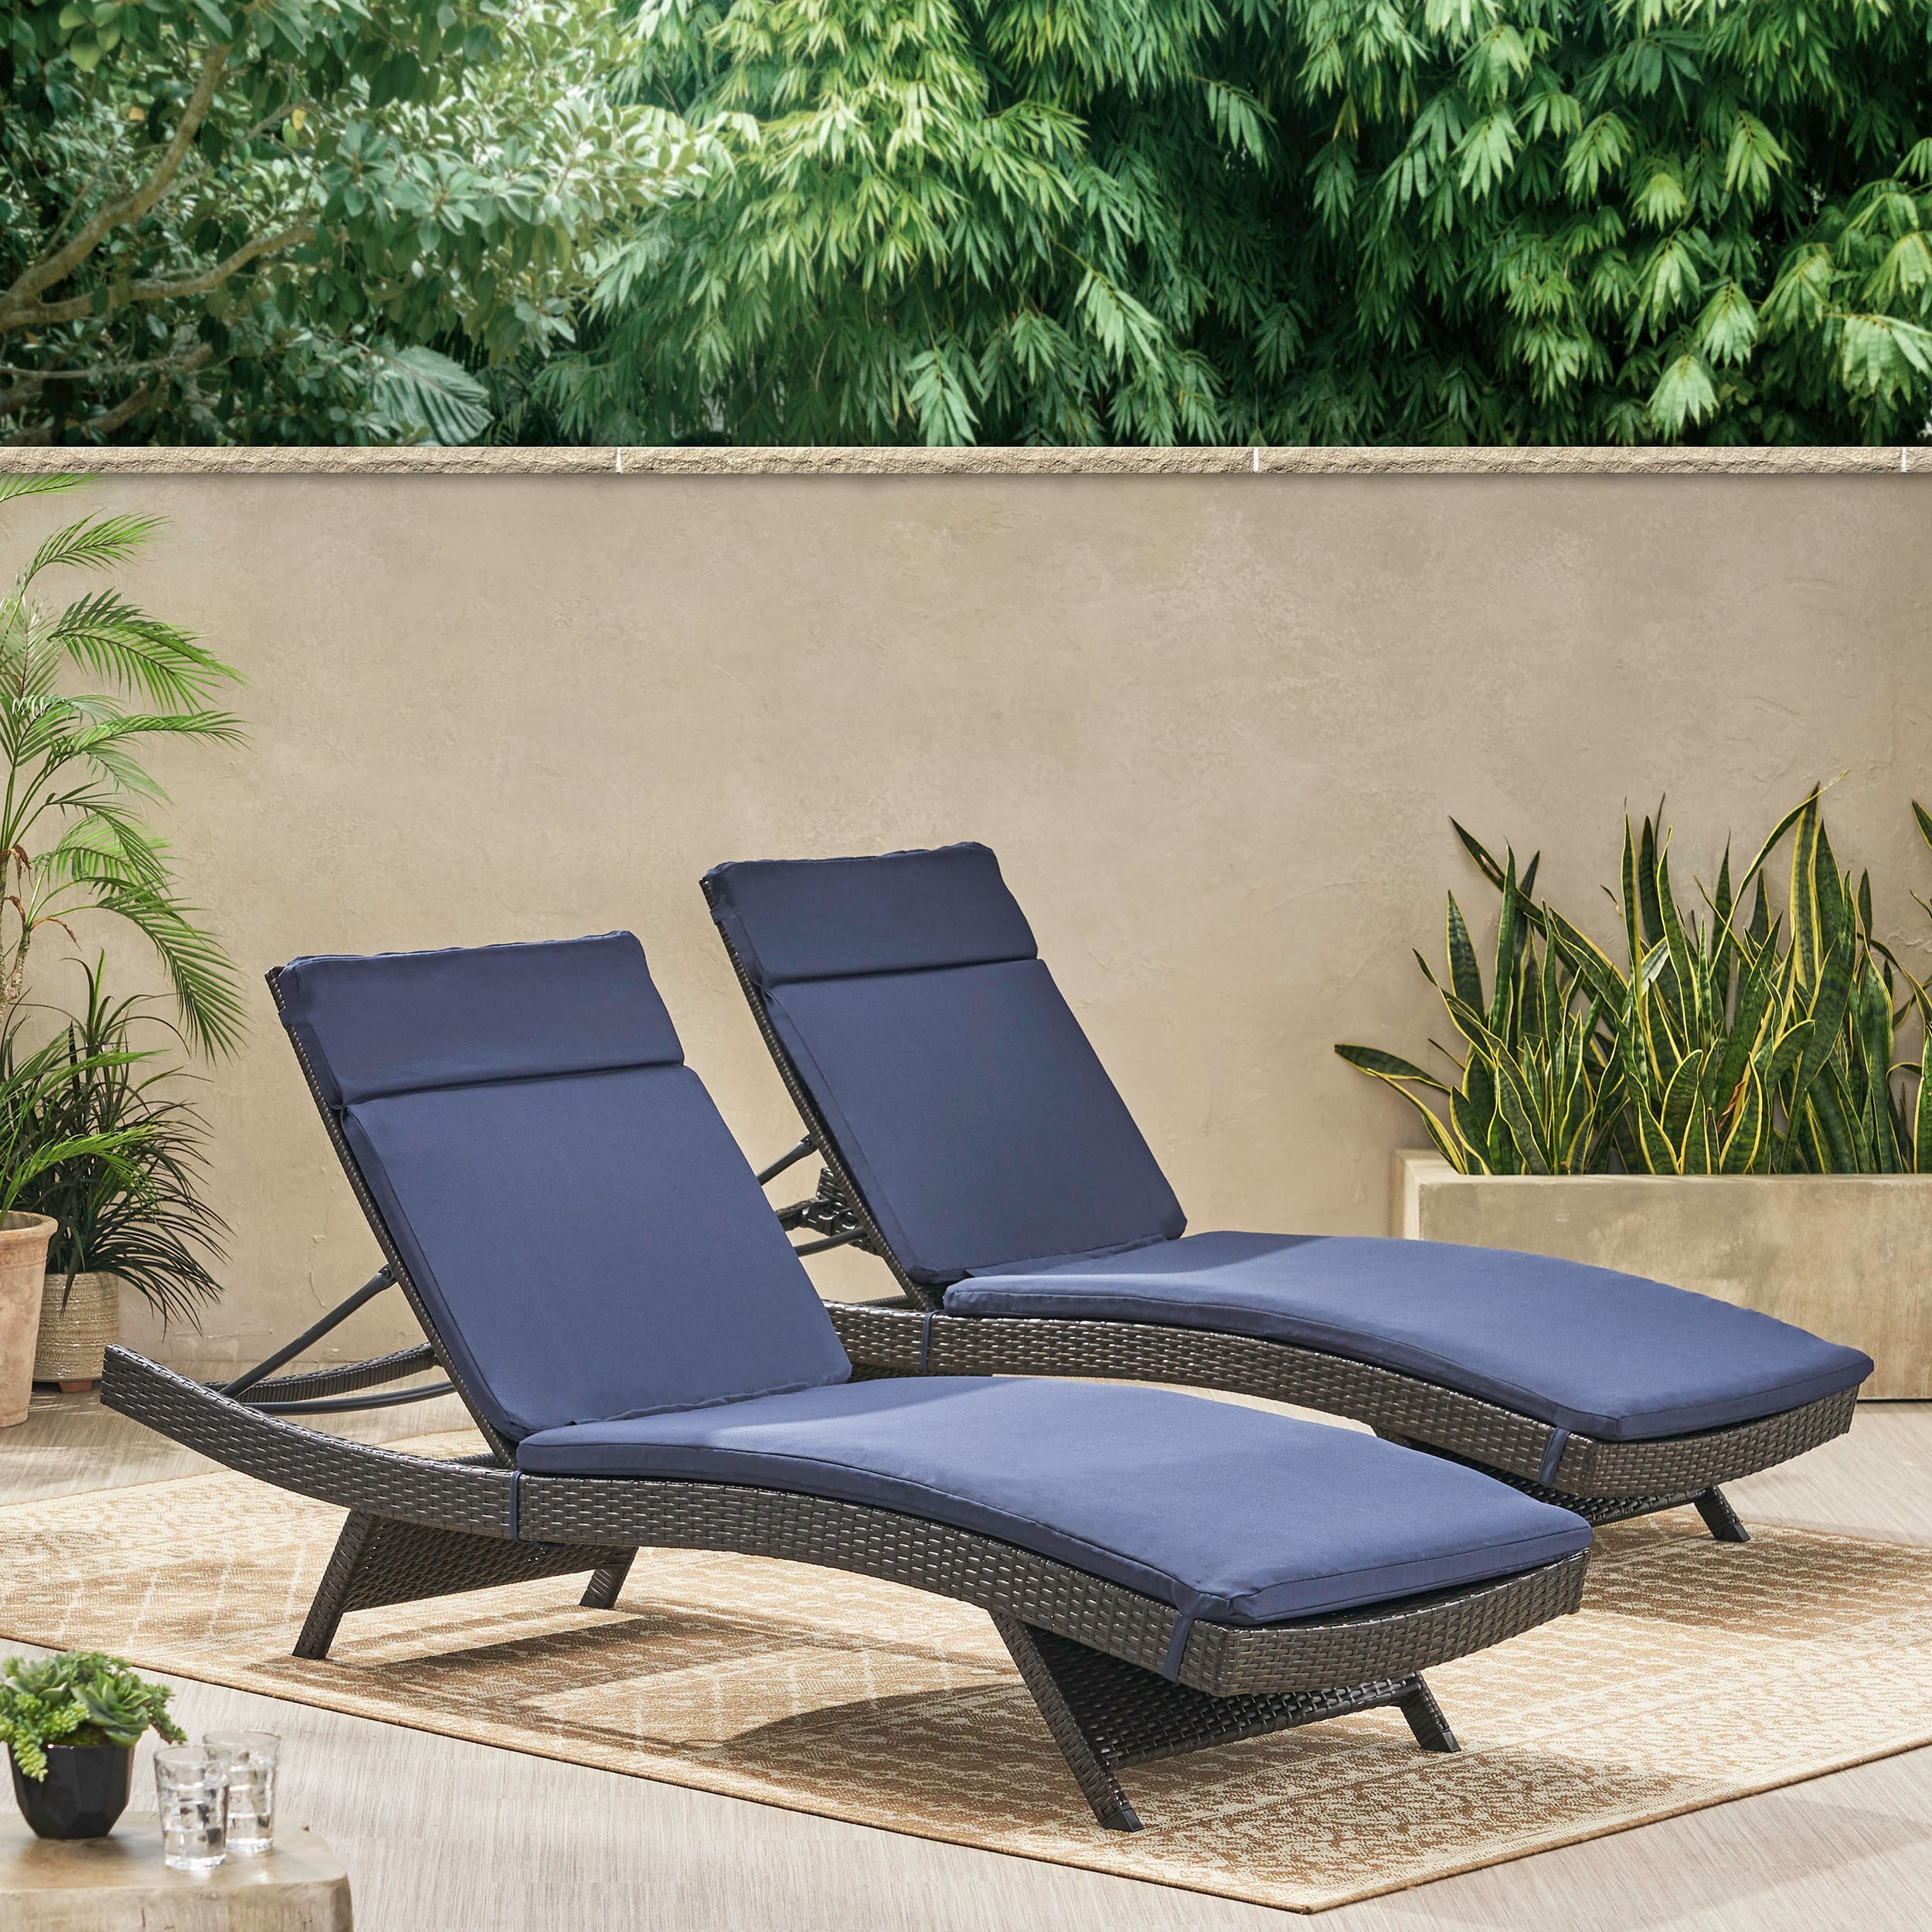 Salem Outdoor Chaise Lounge with Cushion - image 2 of 5